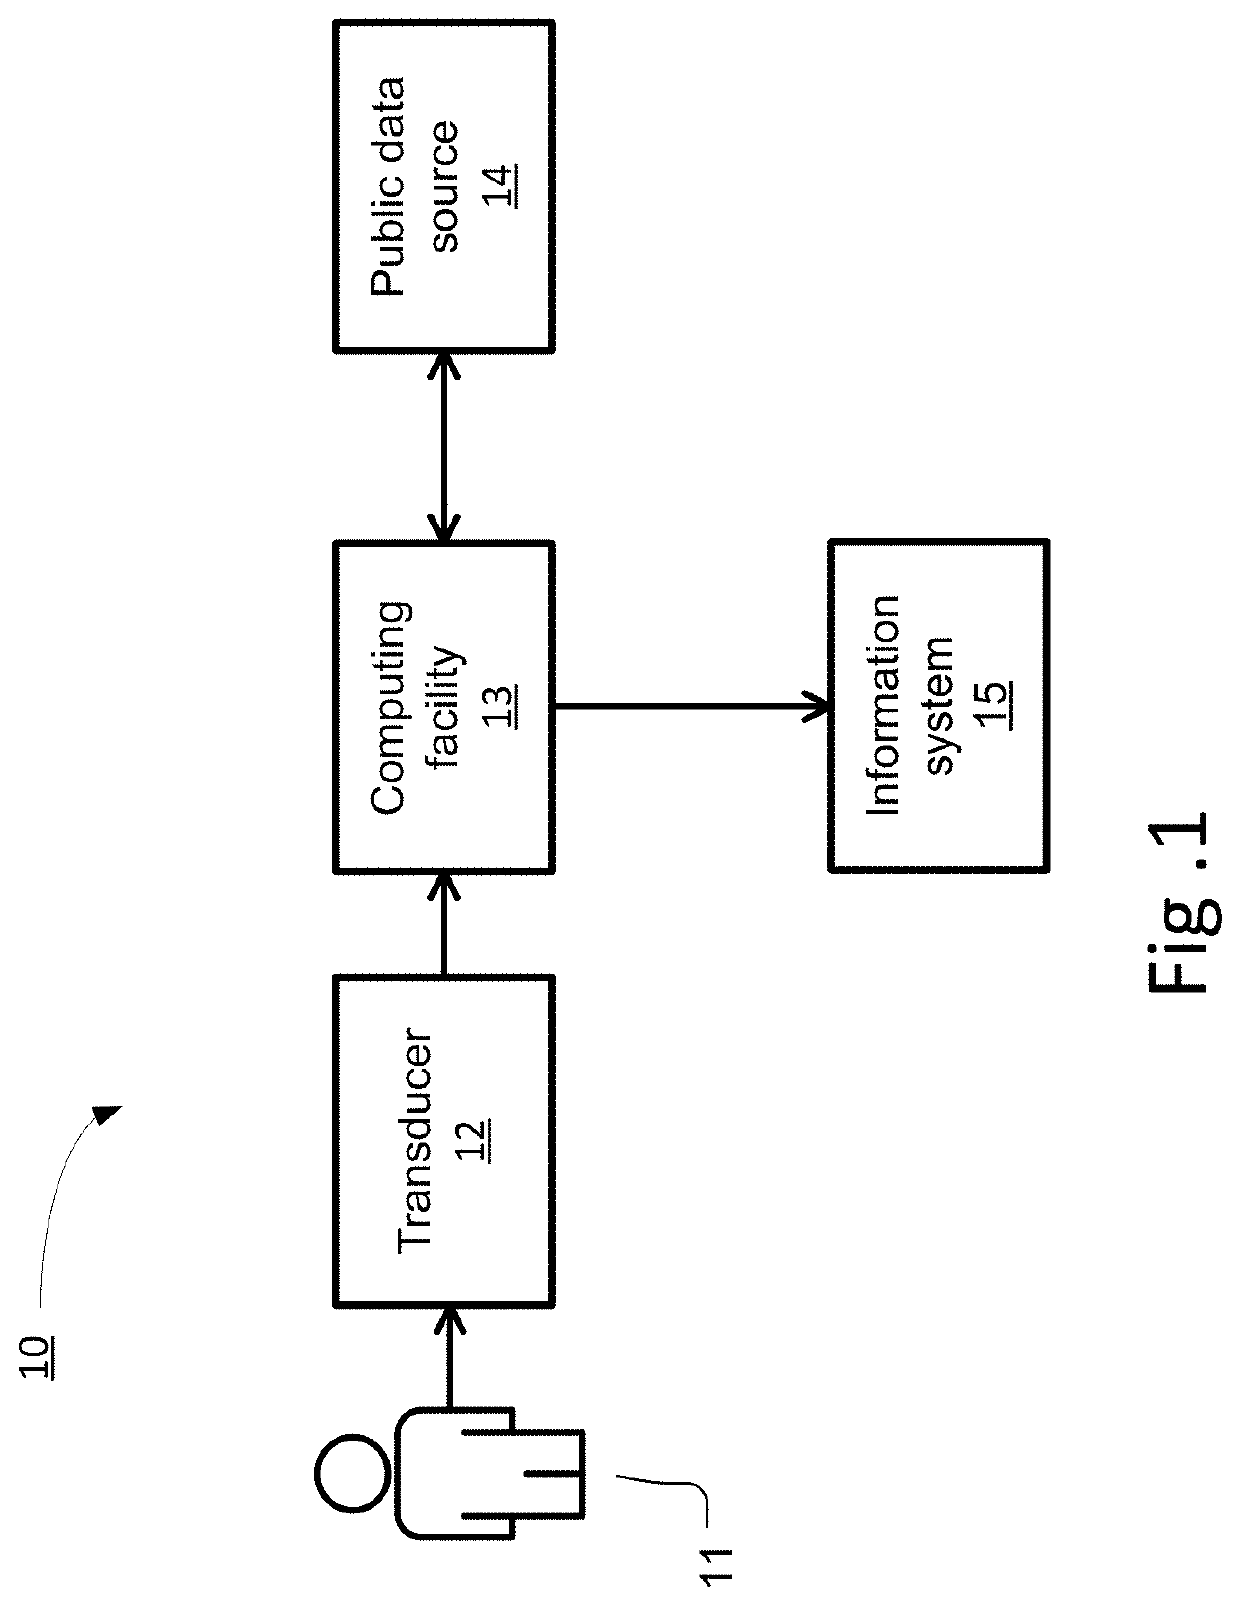 System and Method for Securing Personal Information Via Biometric Public Key